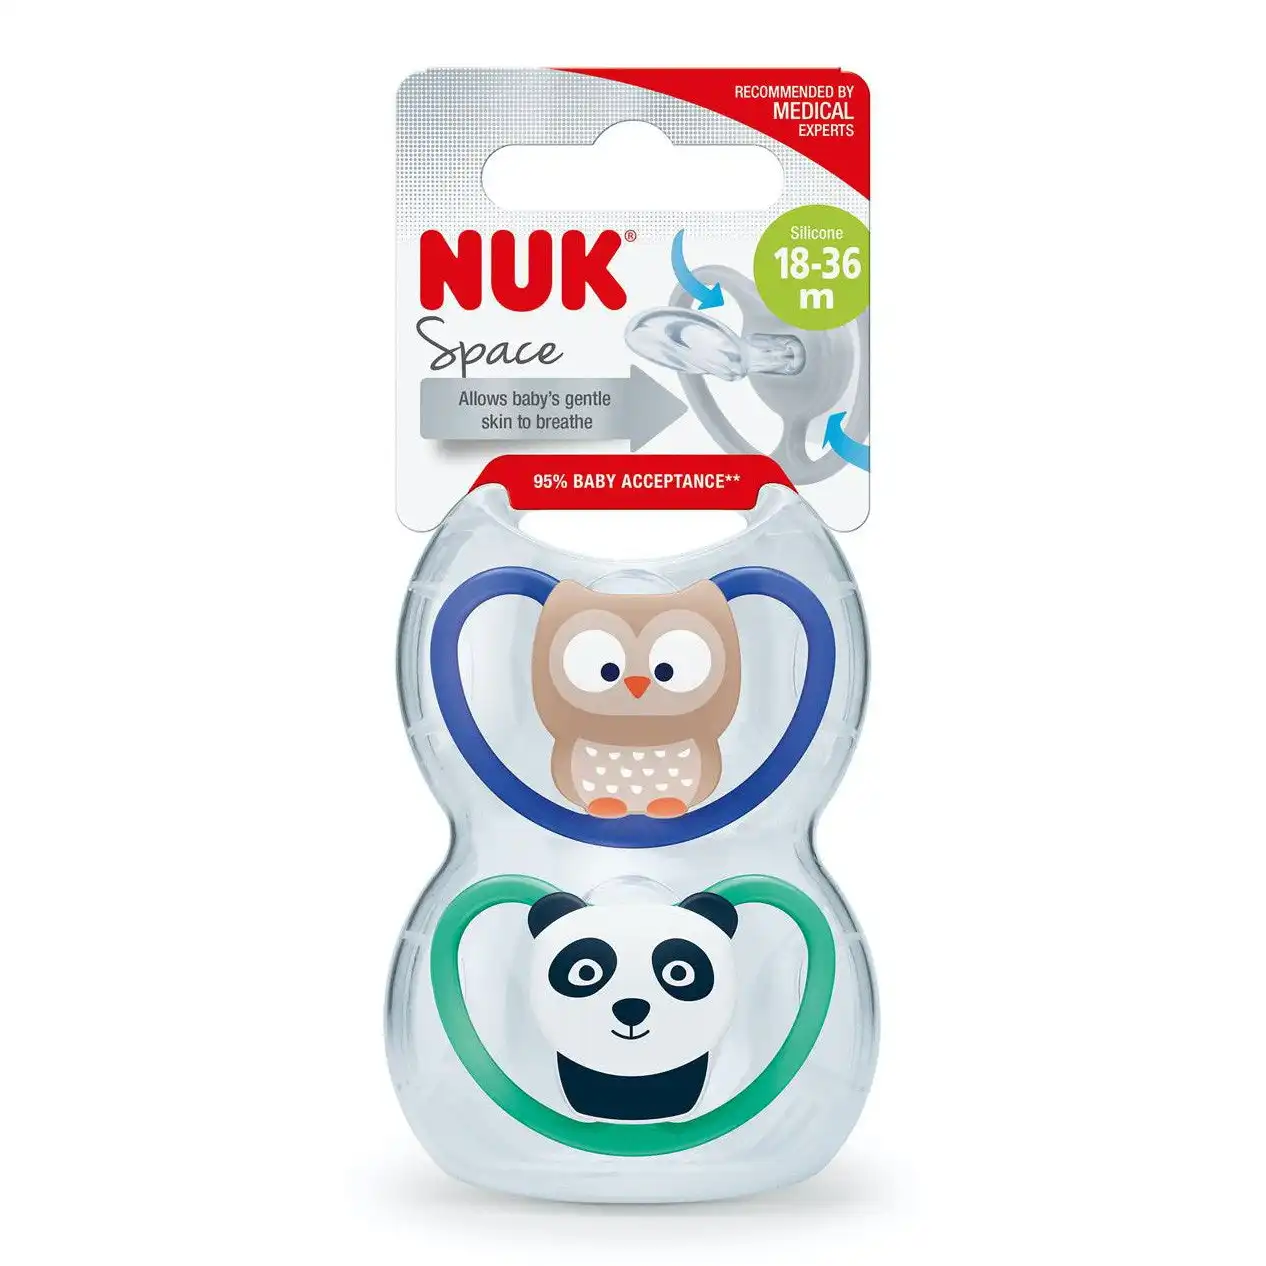 NUK Space Baby Dummy 18-36m, With Extra Ventilation, BPA-Free Silicone, 2 Pack - Assorted